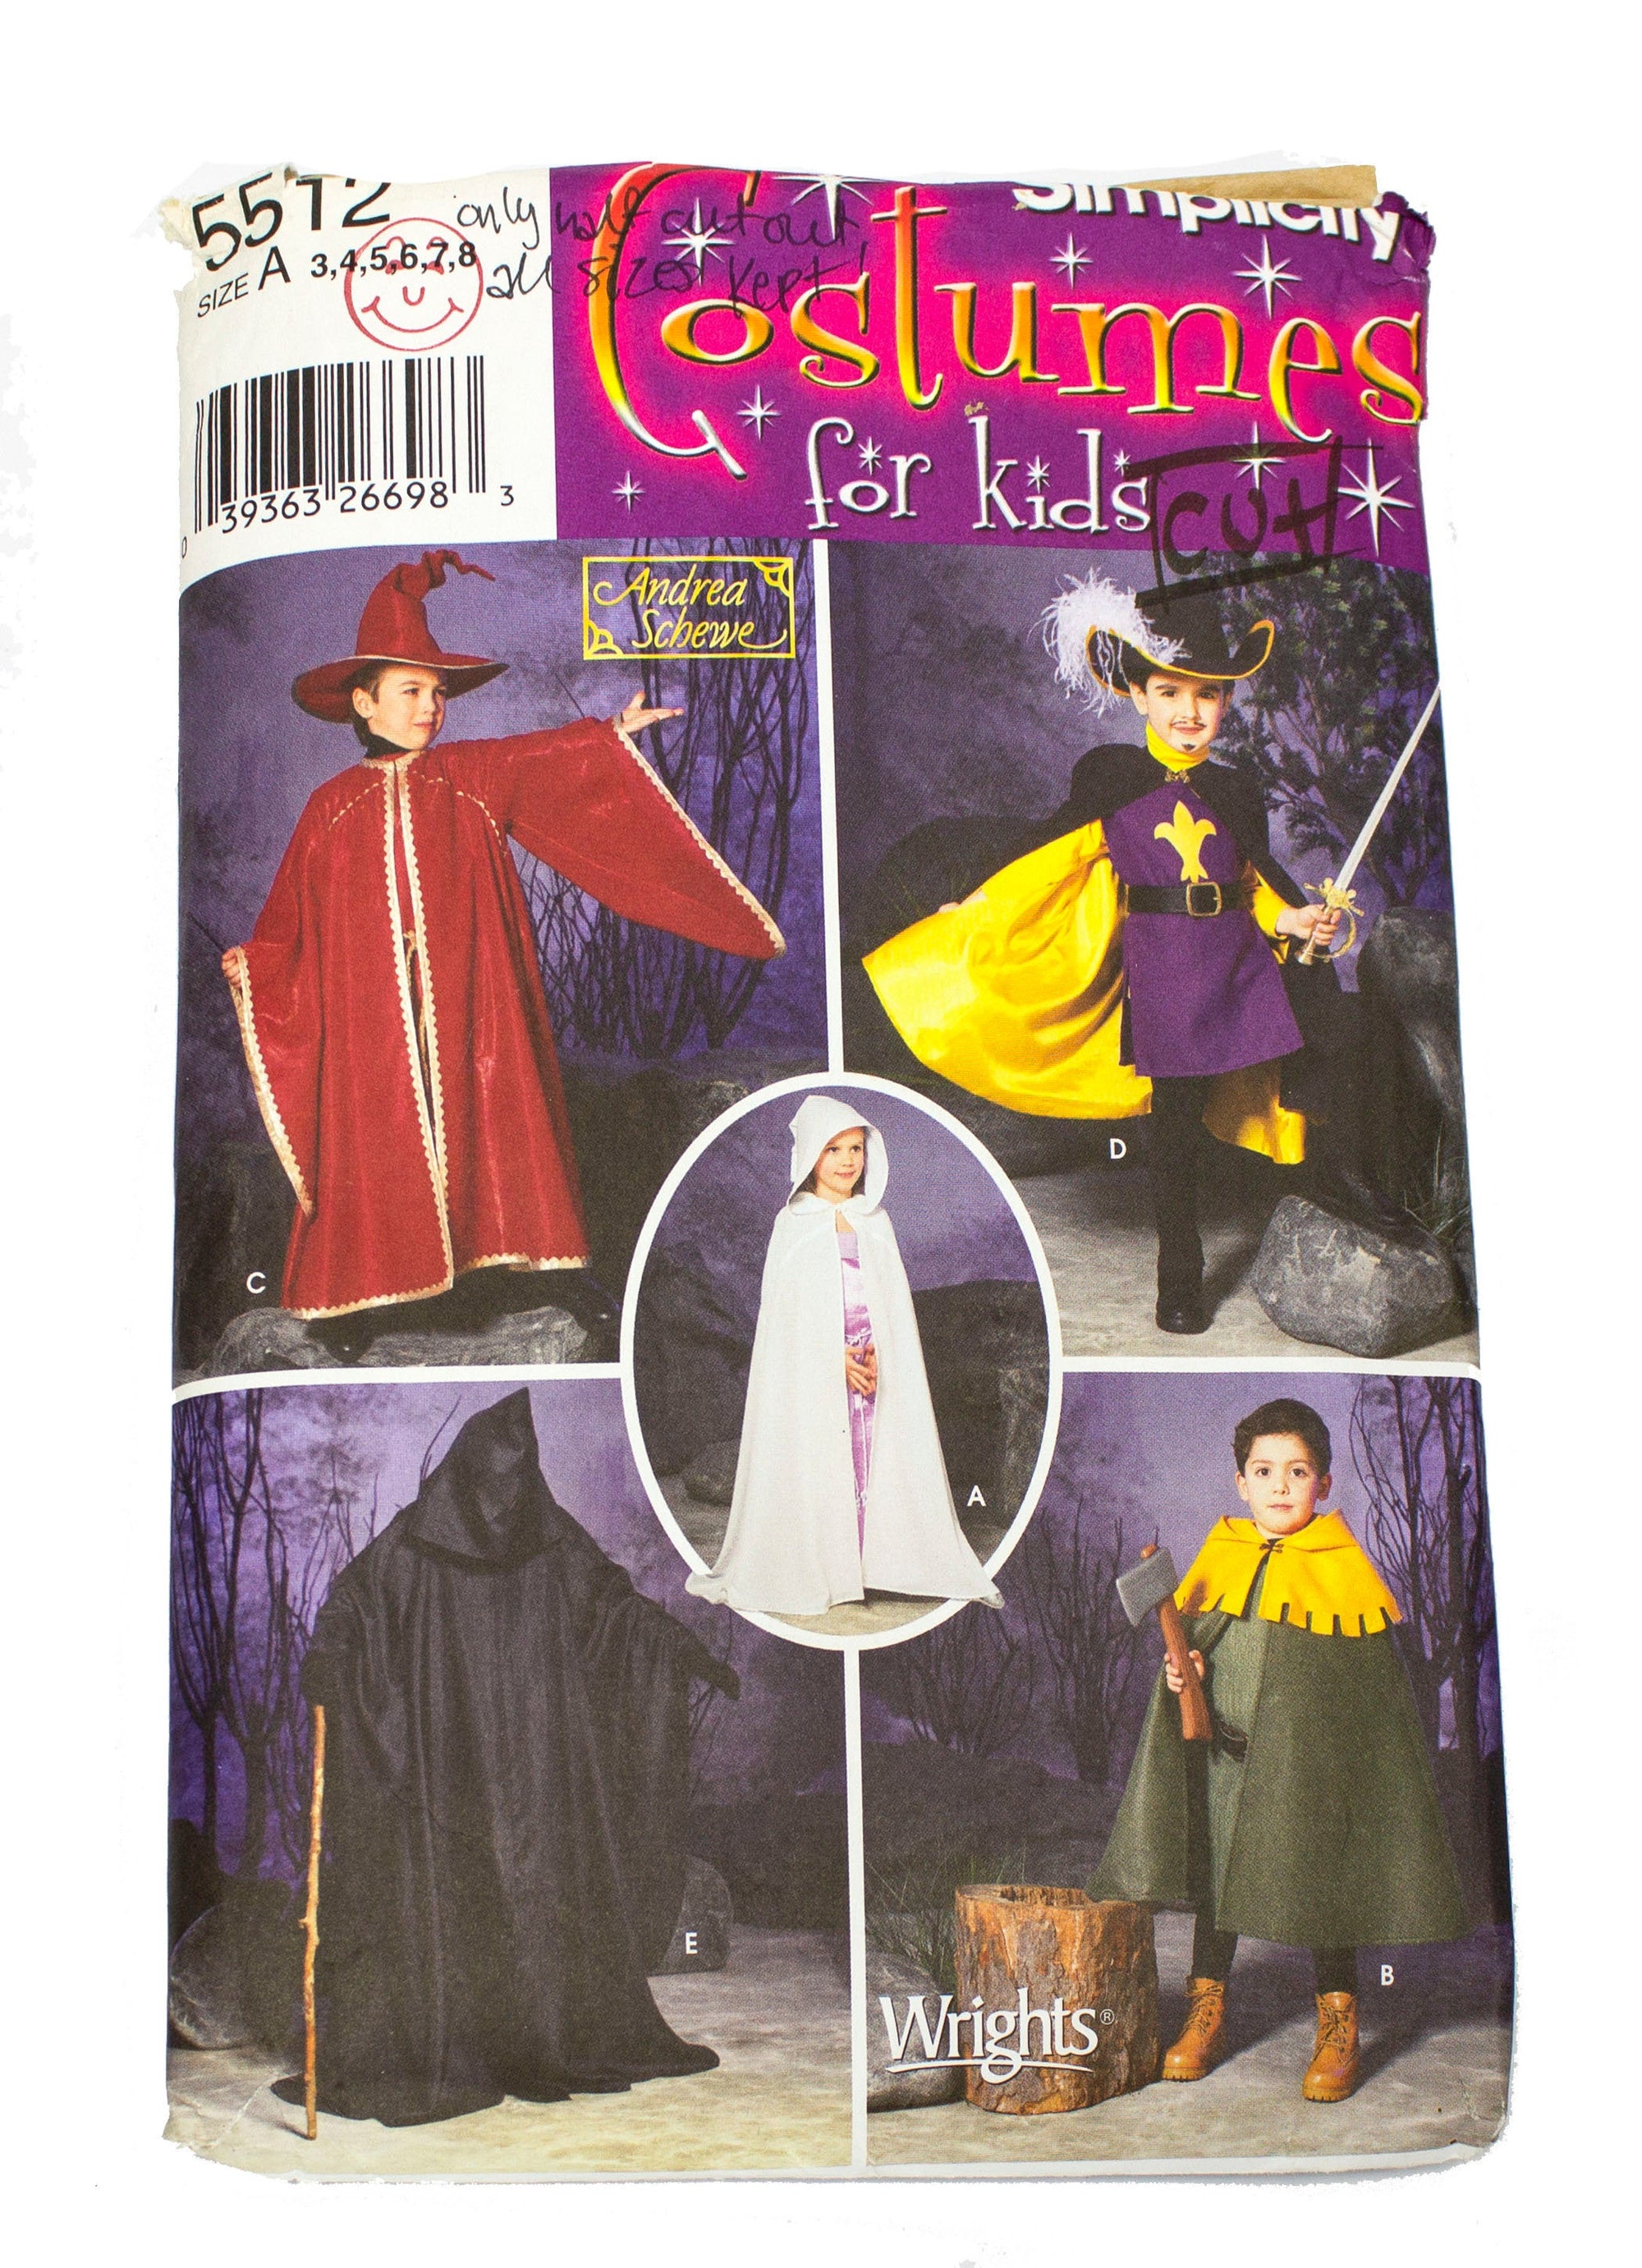 Simplicity 5512 Children's Costume Capes, Tabard, and Hats - Sizes 3 - 8